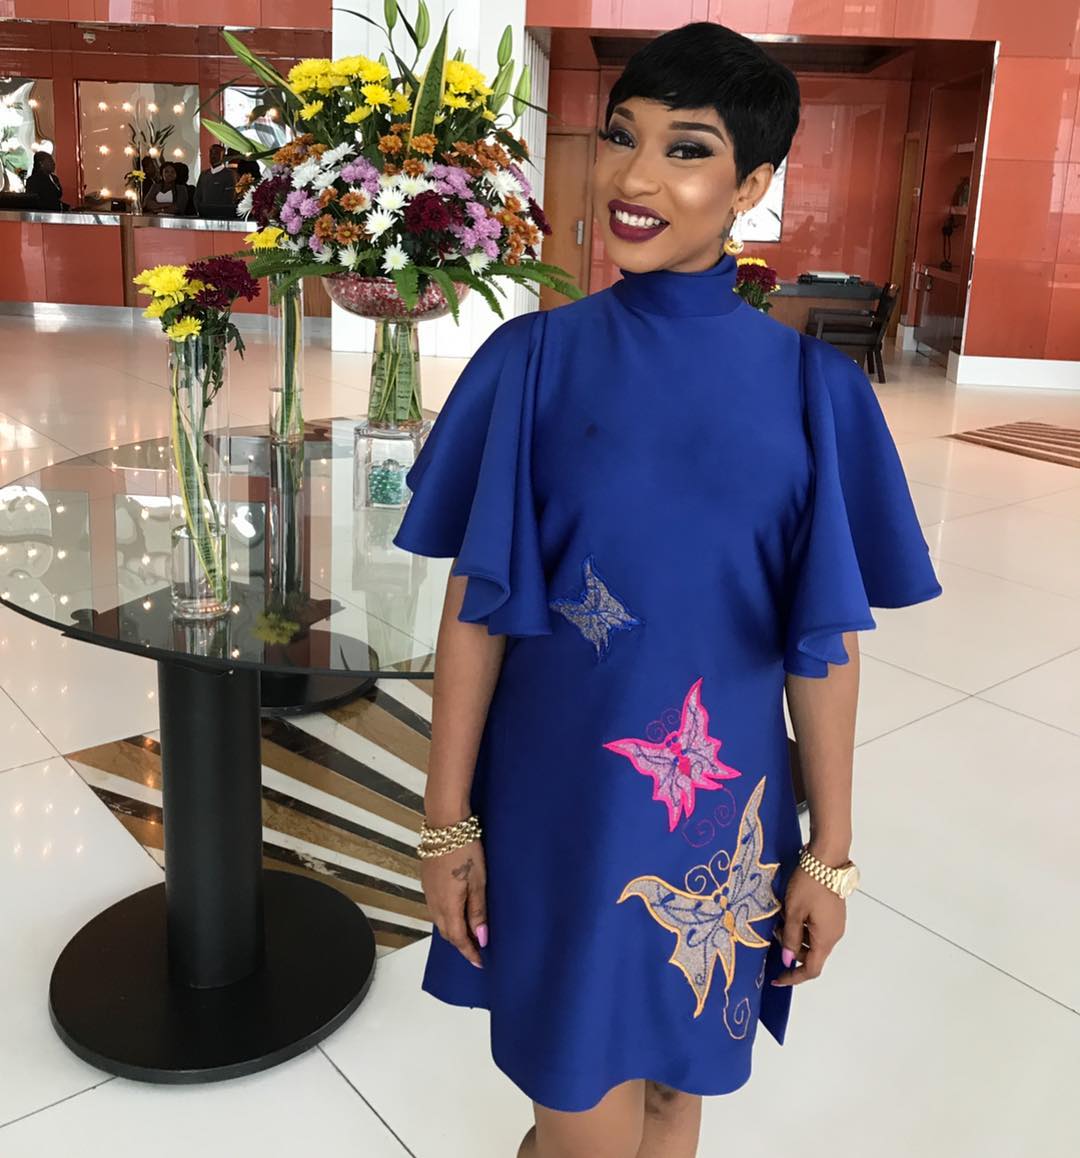 Tonto Dikeh complains after Instagram made some changes that didn't favour her